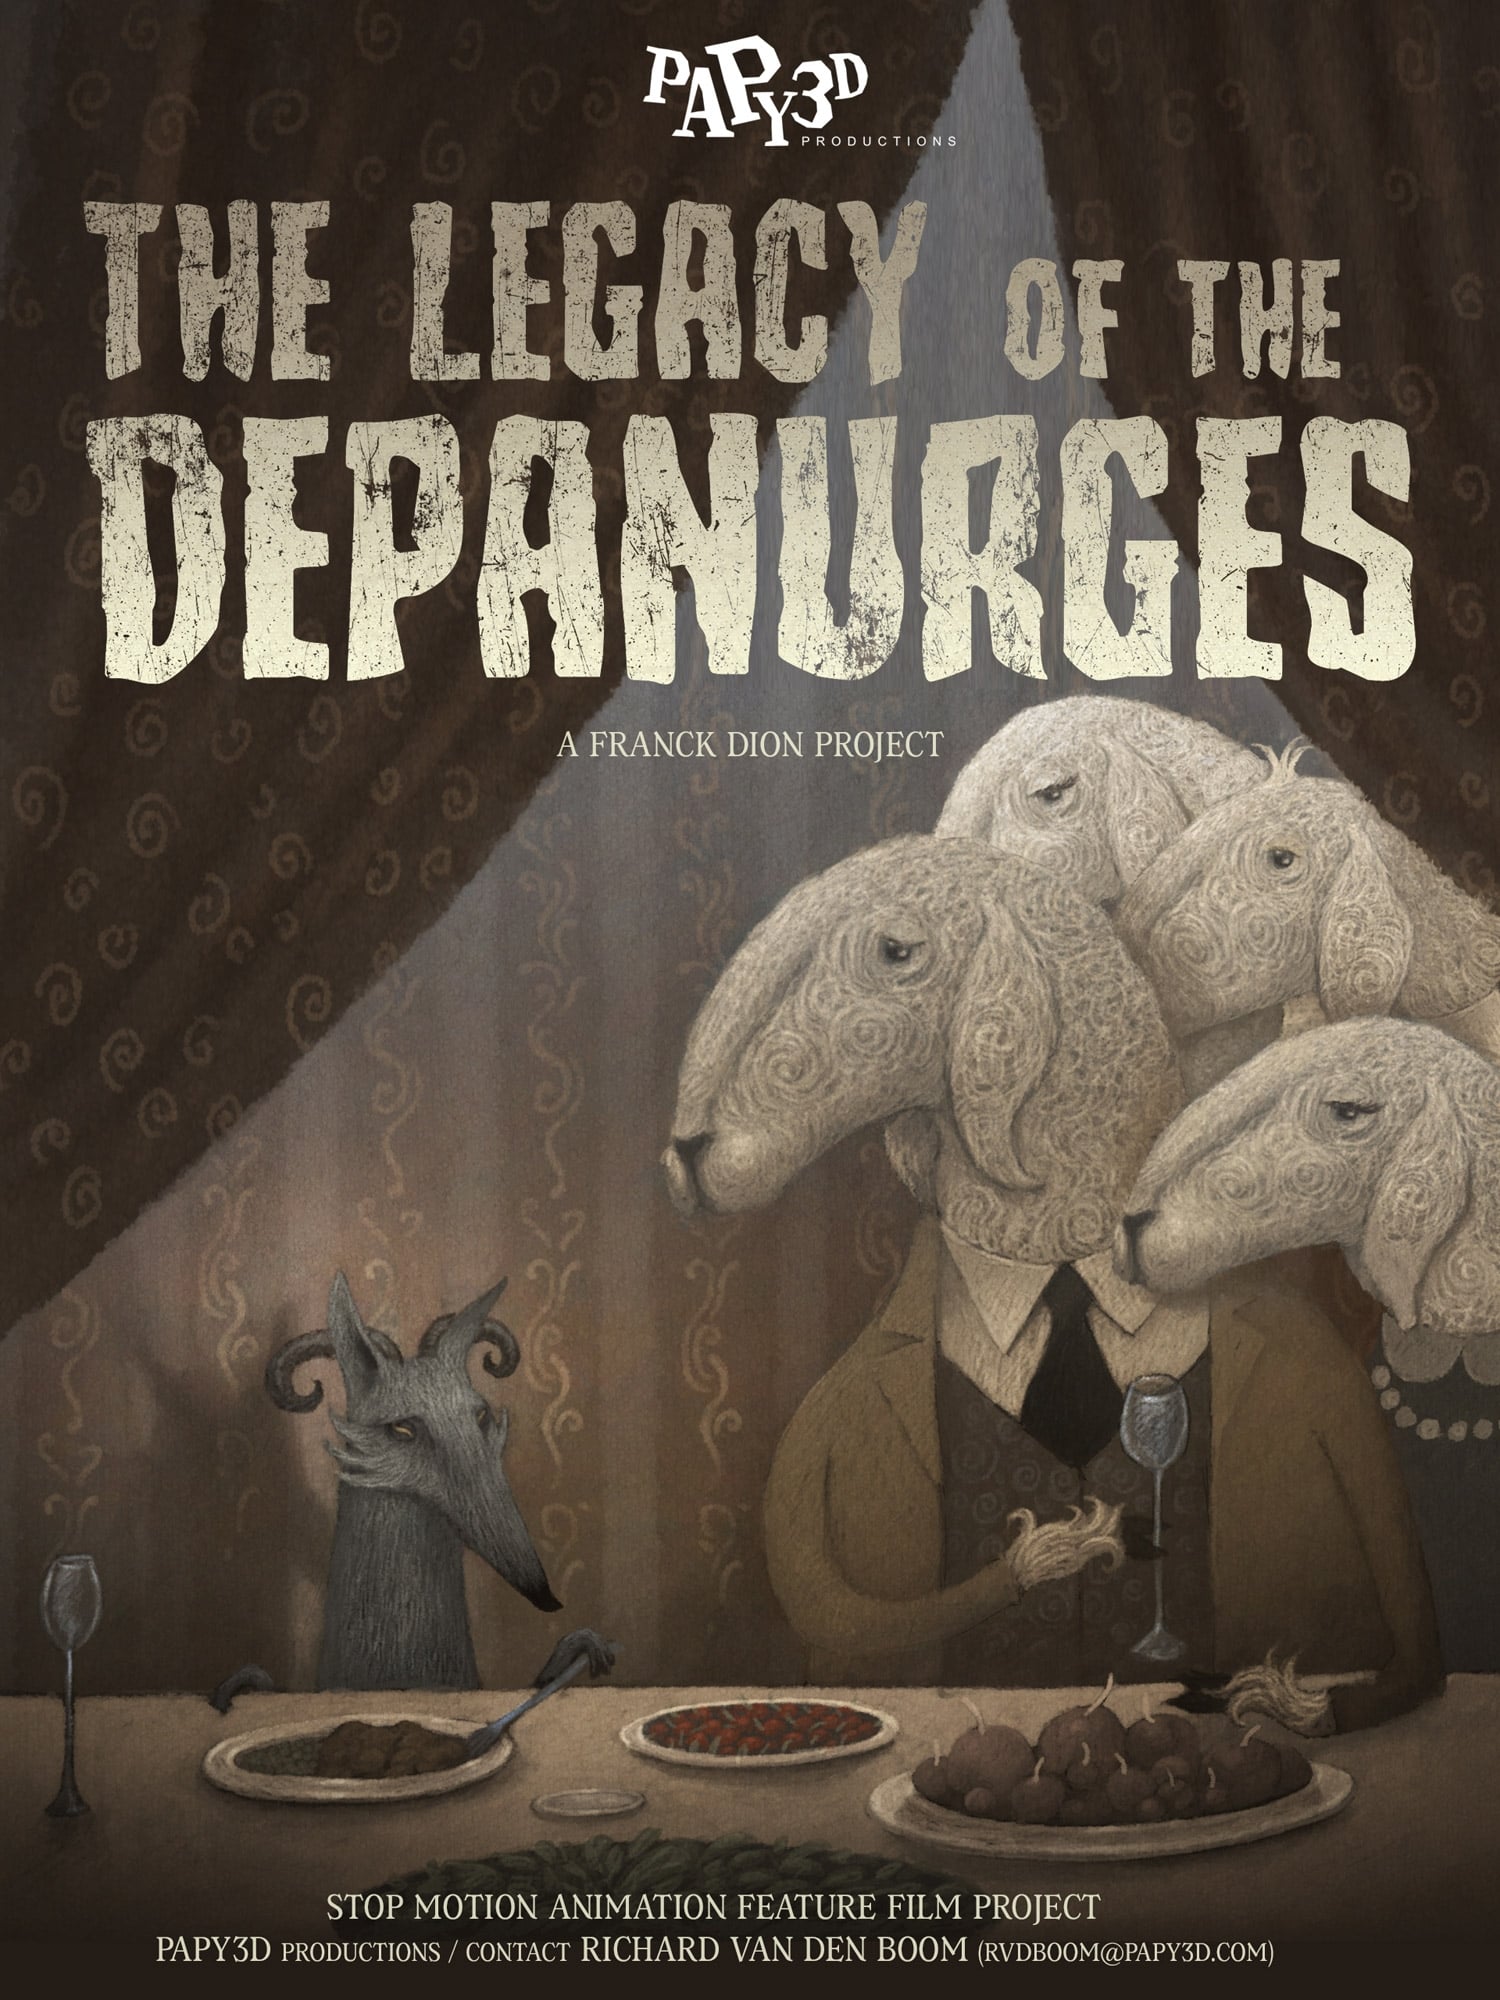 The Legacy of the Depanurges